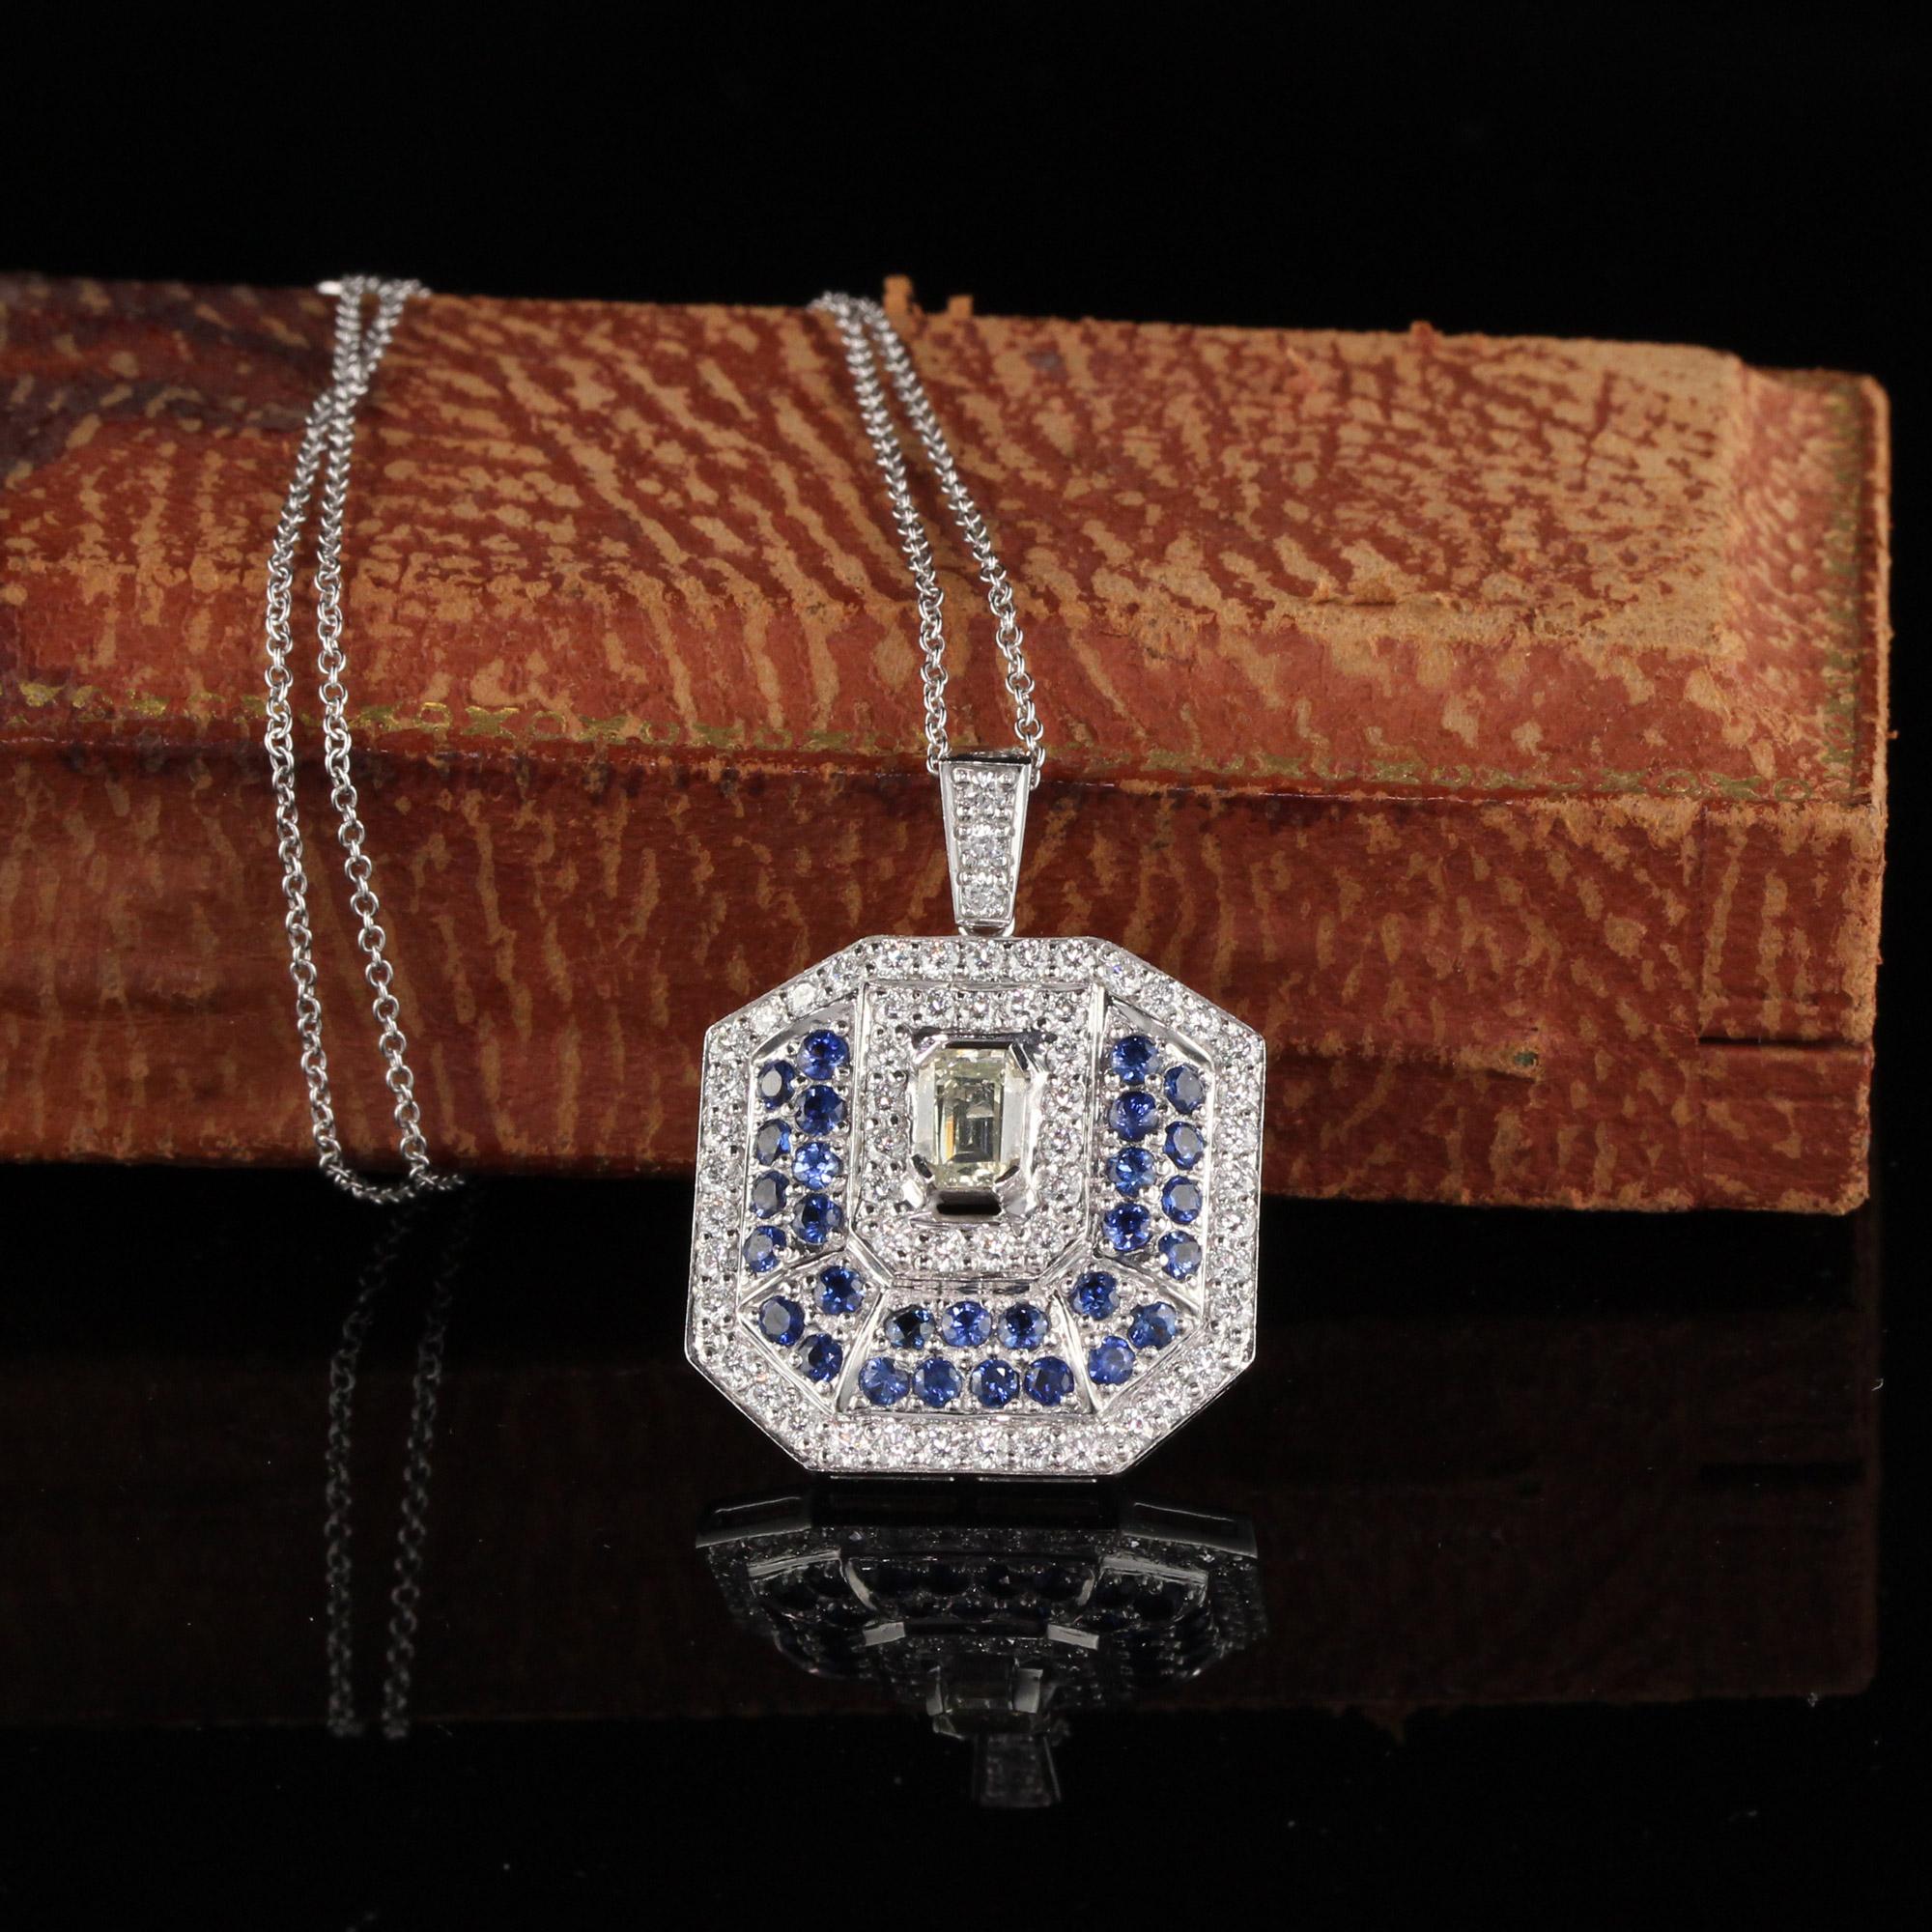 Beautiful Diamond and Sapphire pendant with a 0.65 CT Emerald Cut Diamond on the center of the pendant.

Metal: Platinum

Weight: 10.1 Grams

Total Diamond Weight: Approximately 1.80 CTS

Center Diamond Weight: Approximately 0.65 CTS

Center Diamond